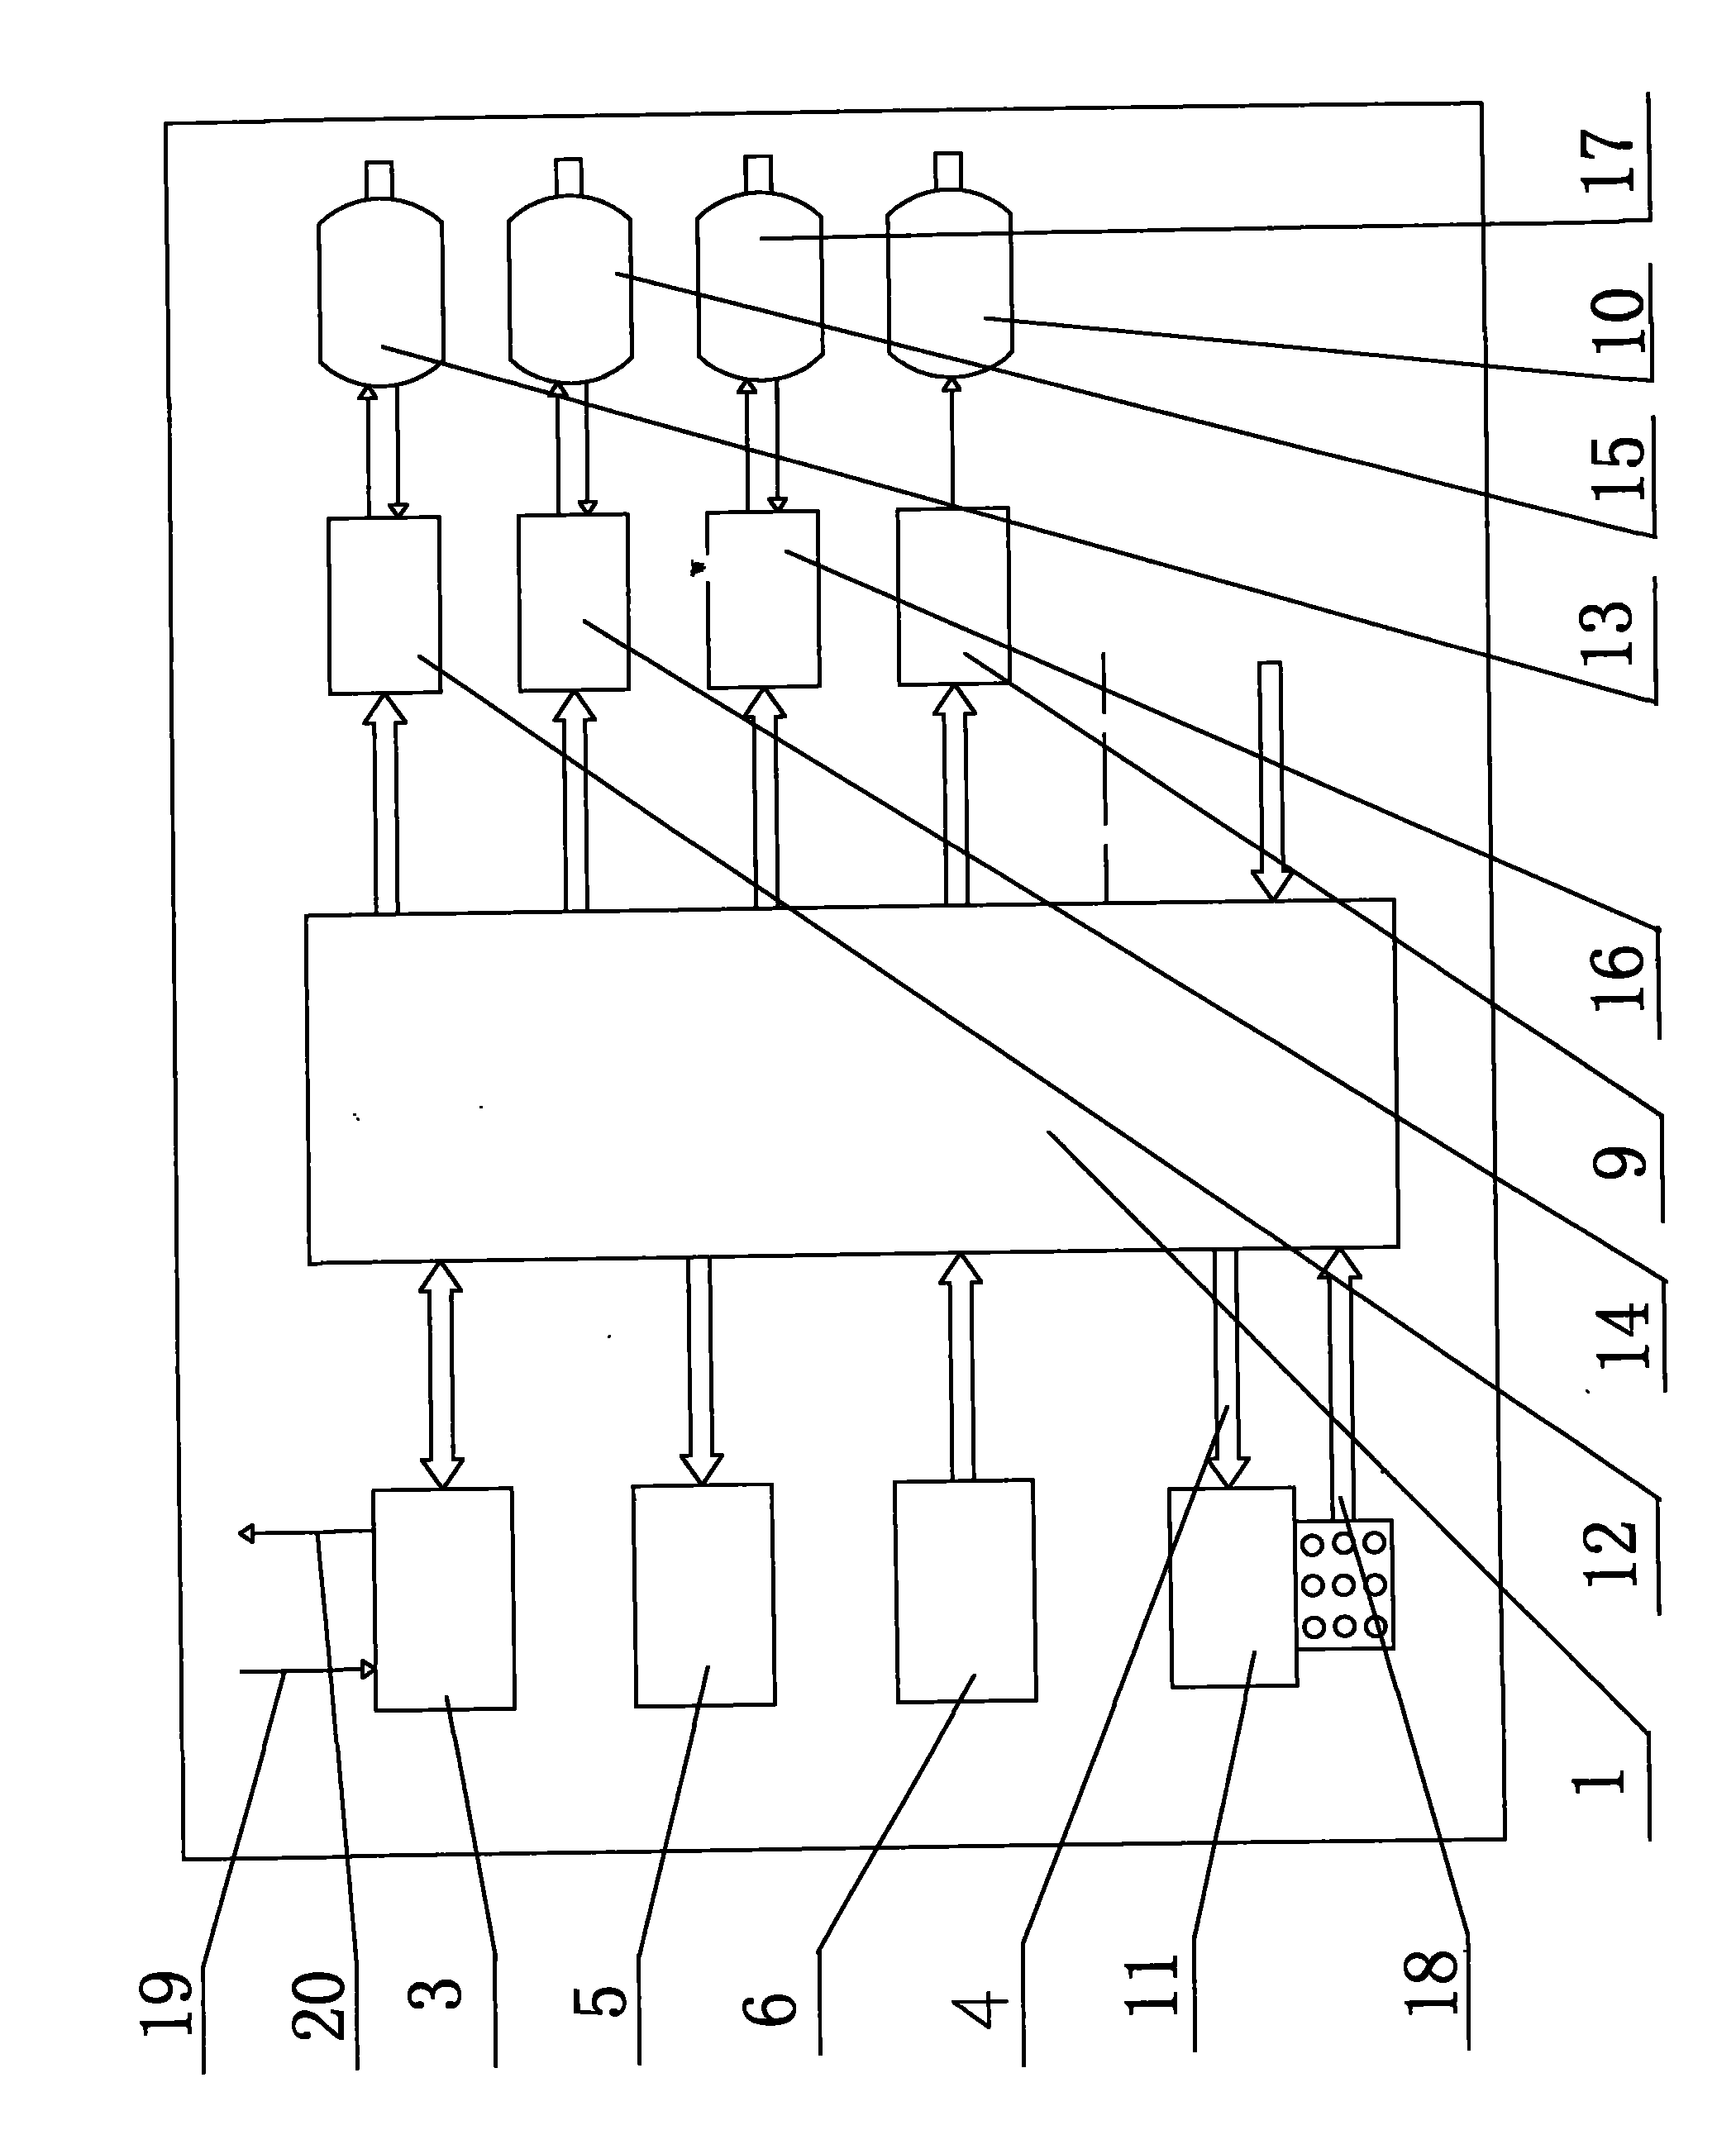 Embedded numerically controlled drill lathe control system and work method